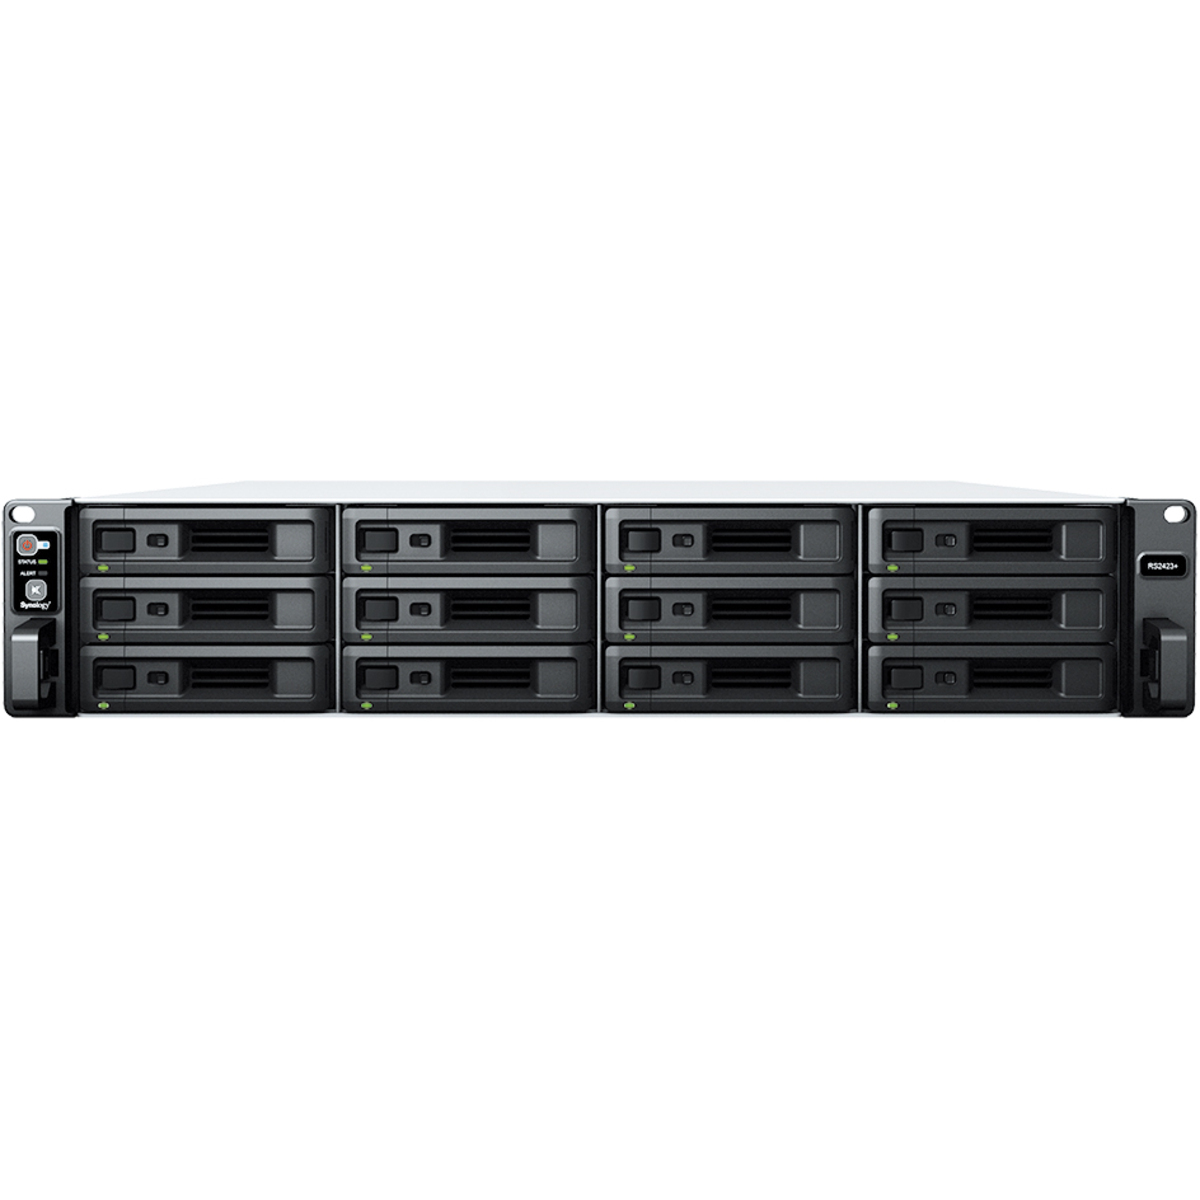 Synology RackStation RS2423RP+ 198tb 12-Bay RackMount Multimedia / Power User / Business NAS - Network Attached Storage Device 9x22tb Toshiba Enterprise Capacity MG10AFA22TE 3.5 7200rpm SATA 6Gb/s HDD ENTERPRISE Class Drives Installed - Burn-In Tested - FREE RAM UPGRADE RackStation RS2423RP+